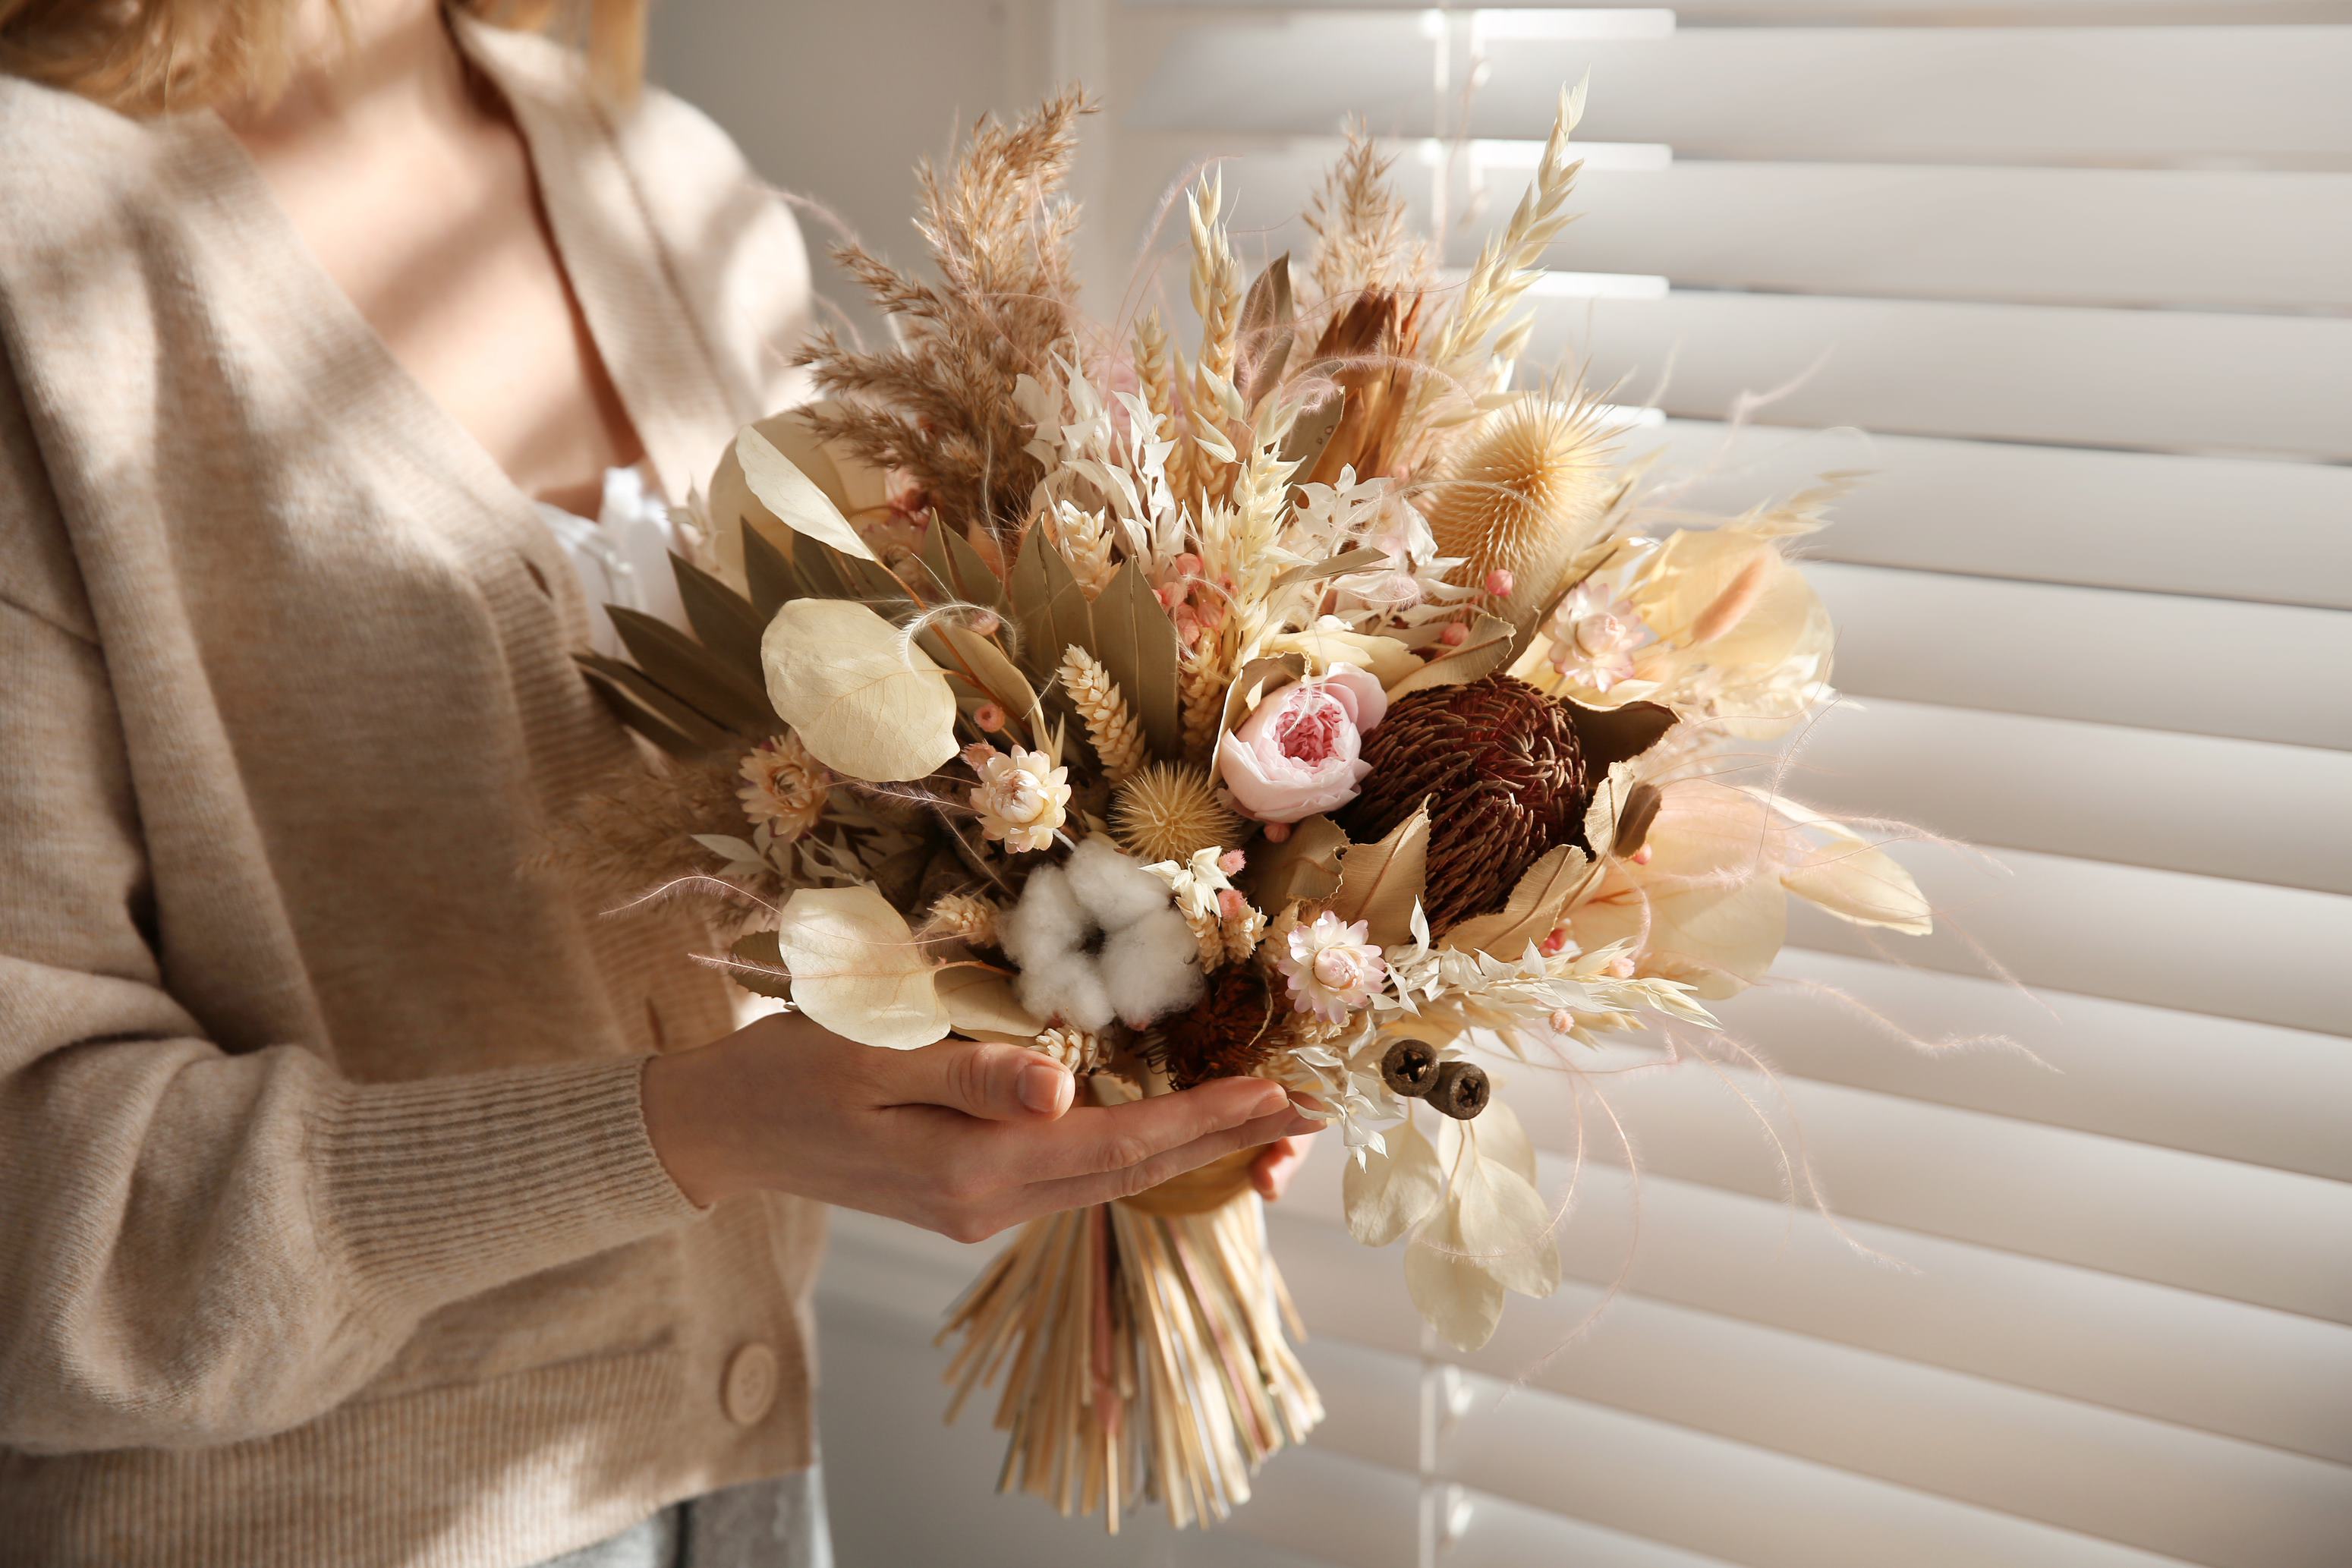 Blog :: Quick Guide on Dried Flower Decorating